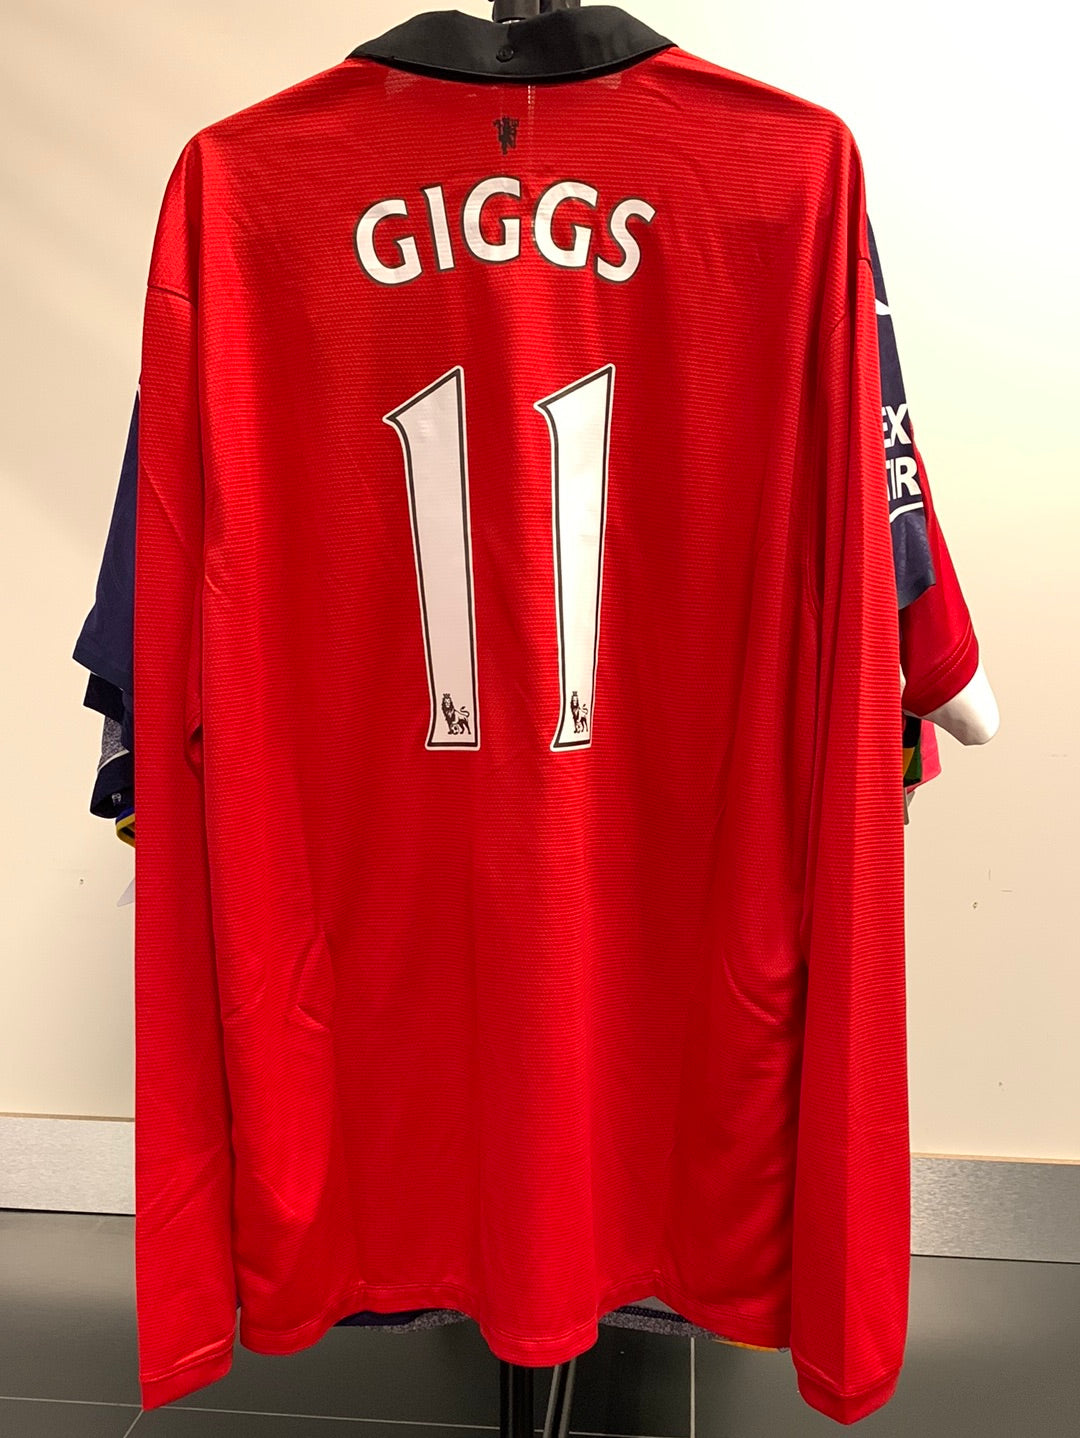 Manchester United Hjemme 13/14 LS Giggs 11